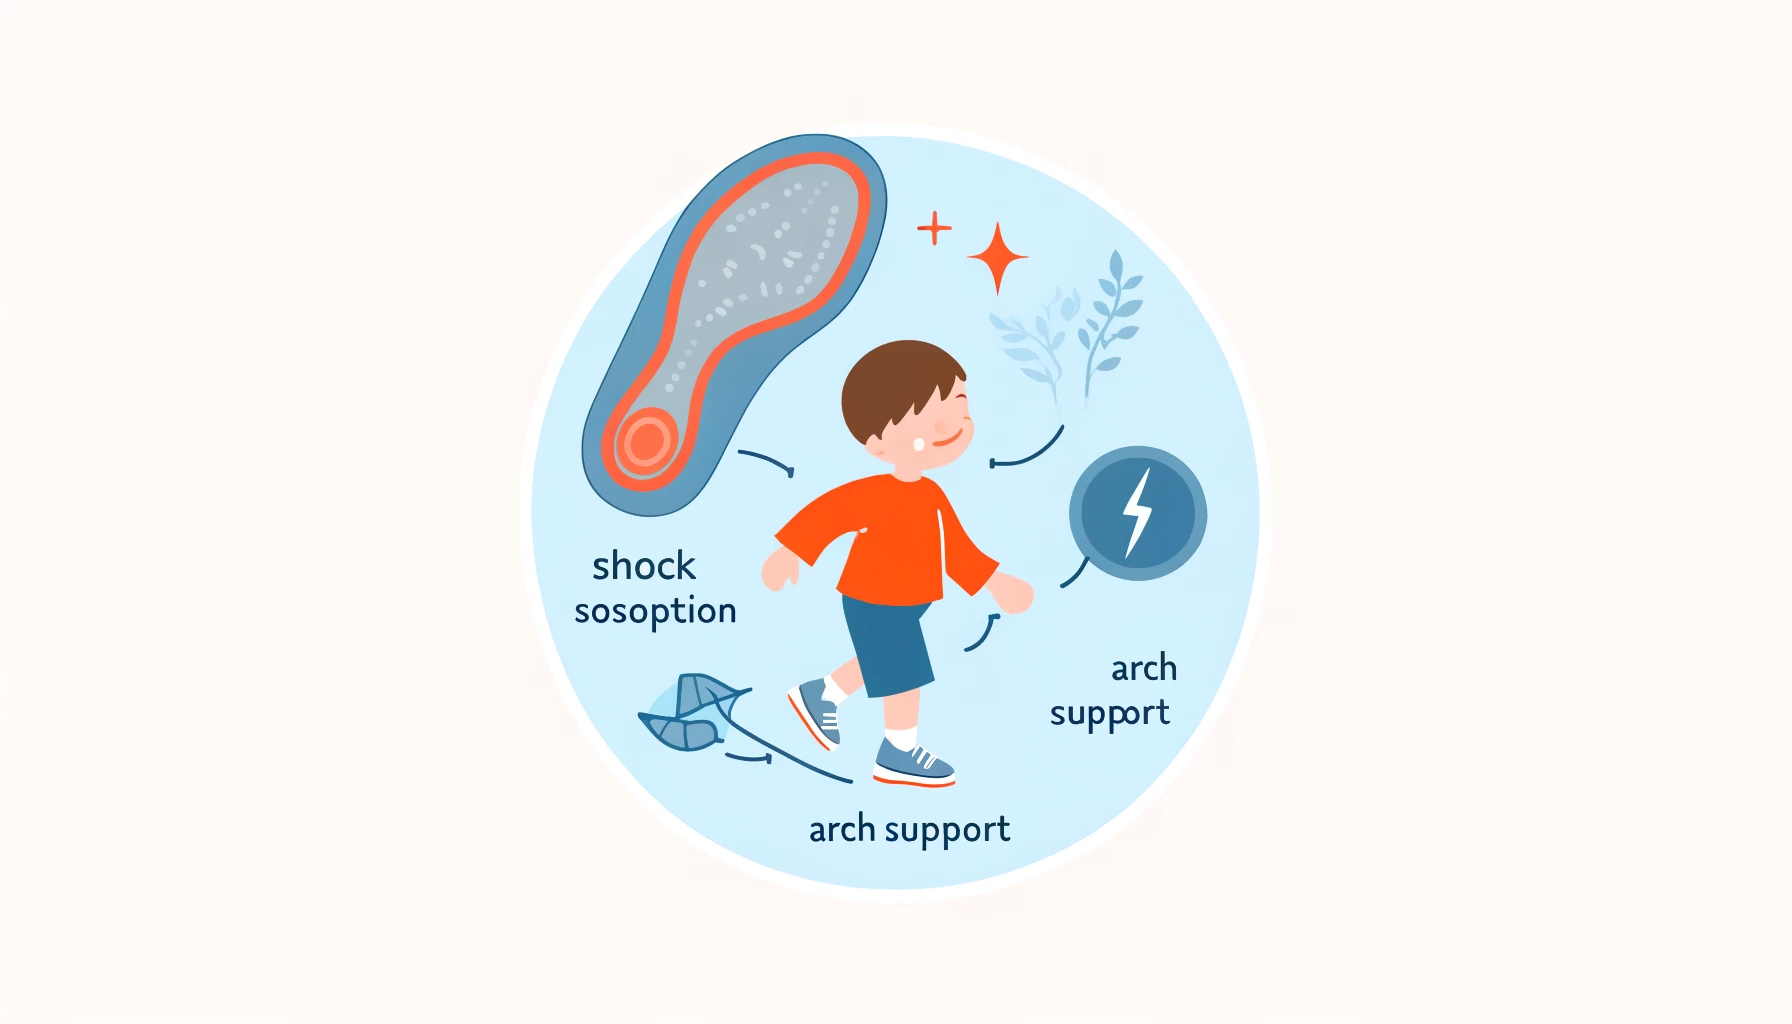 Simple illustration showing benefits of gel insoles for pediatric posture, focusing on shock absorption, arch support, and comfort.